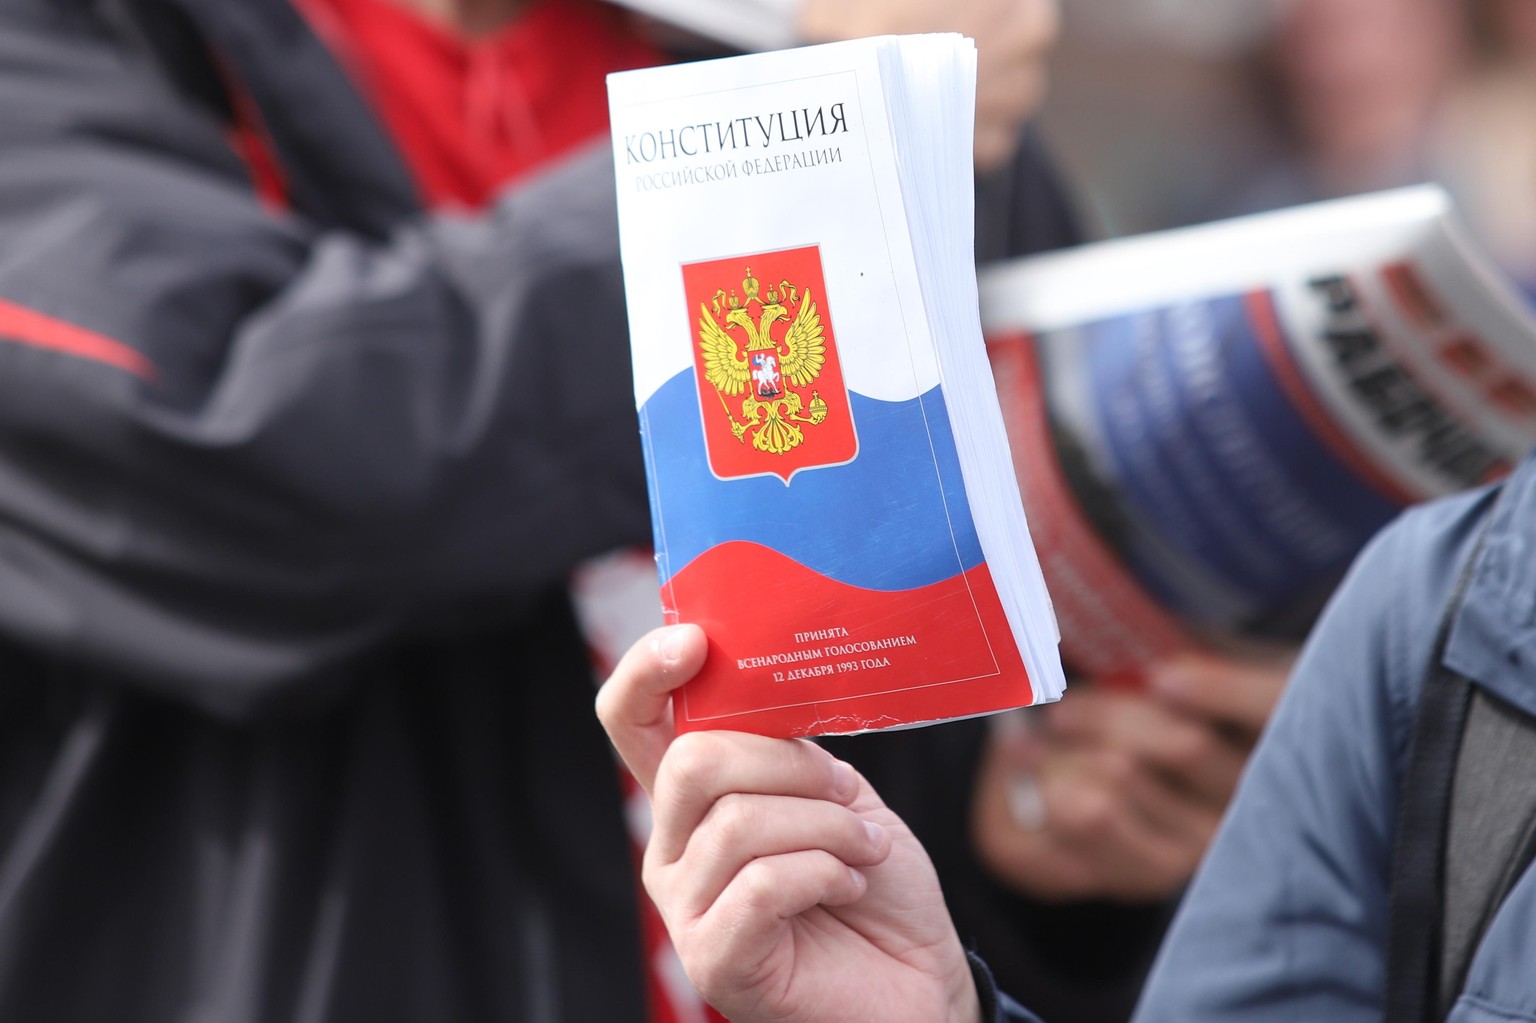 July 1, 2020, Saint-Petersburg, Russia: A man holding a Russian Constitution during a protest against constitutional amendments..1 July is the main day of voting on the constitutional amendments that  ...